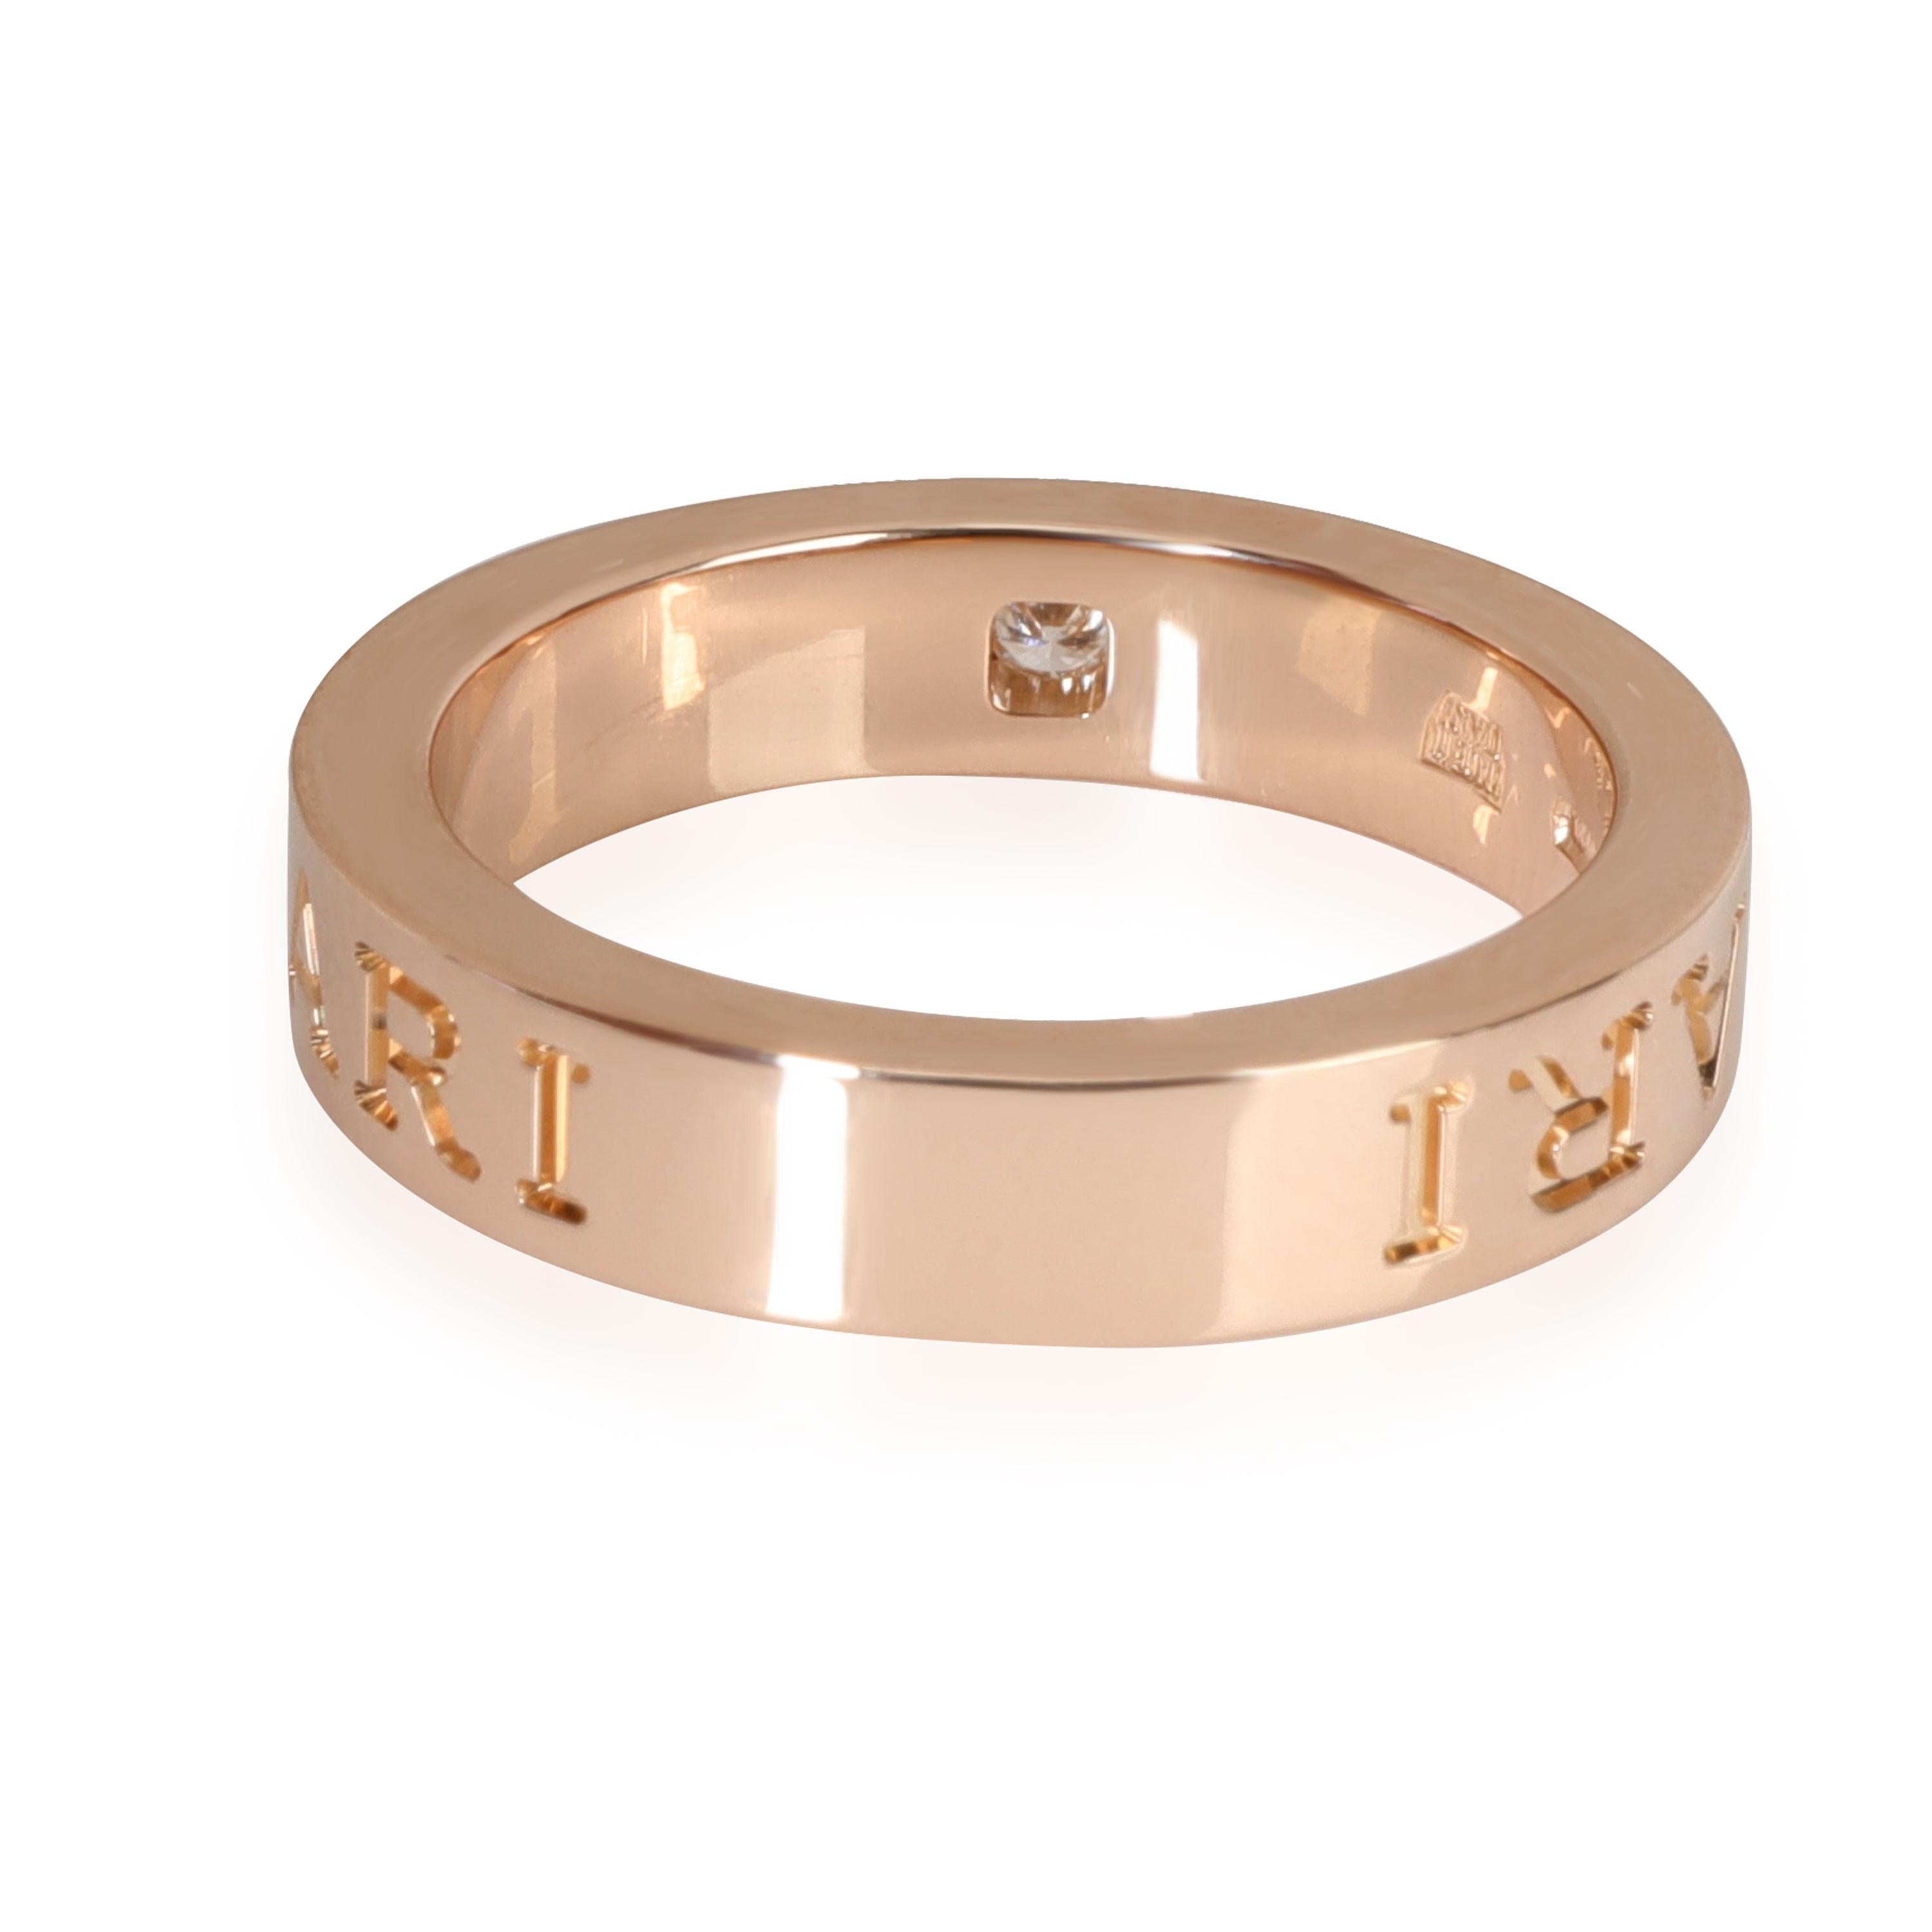 Bulgari Bvlgari Bvlgari Diamond Band in 18kt Rose Gold 0.02 CTW

PRIMARY DETAILS
SKU: 114034
Listing Title: Bulgari Bvlgari Bvlgari Diamond Band in 18kt Rose Gold 0.02 CTW
Condition Description: Retails for 2070 USD. In excellent condition and